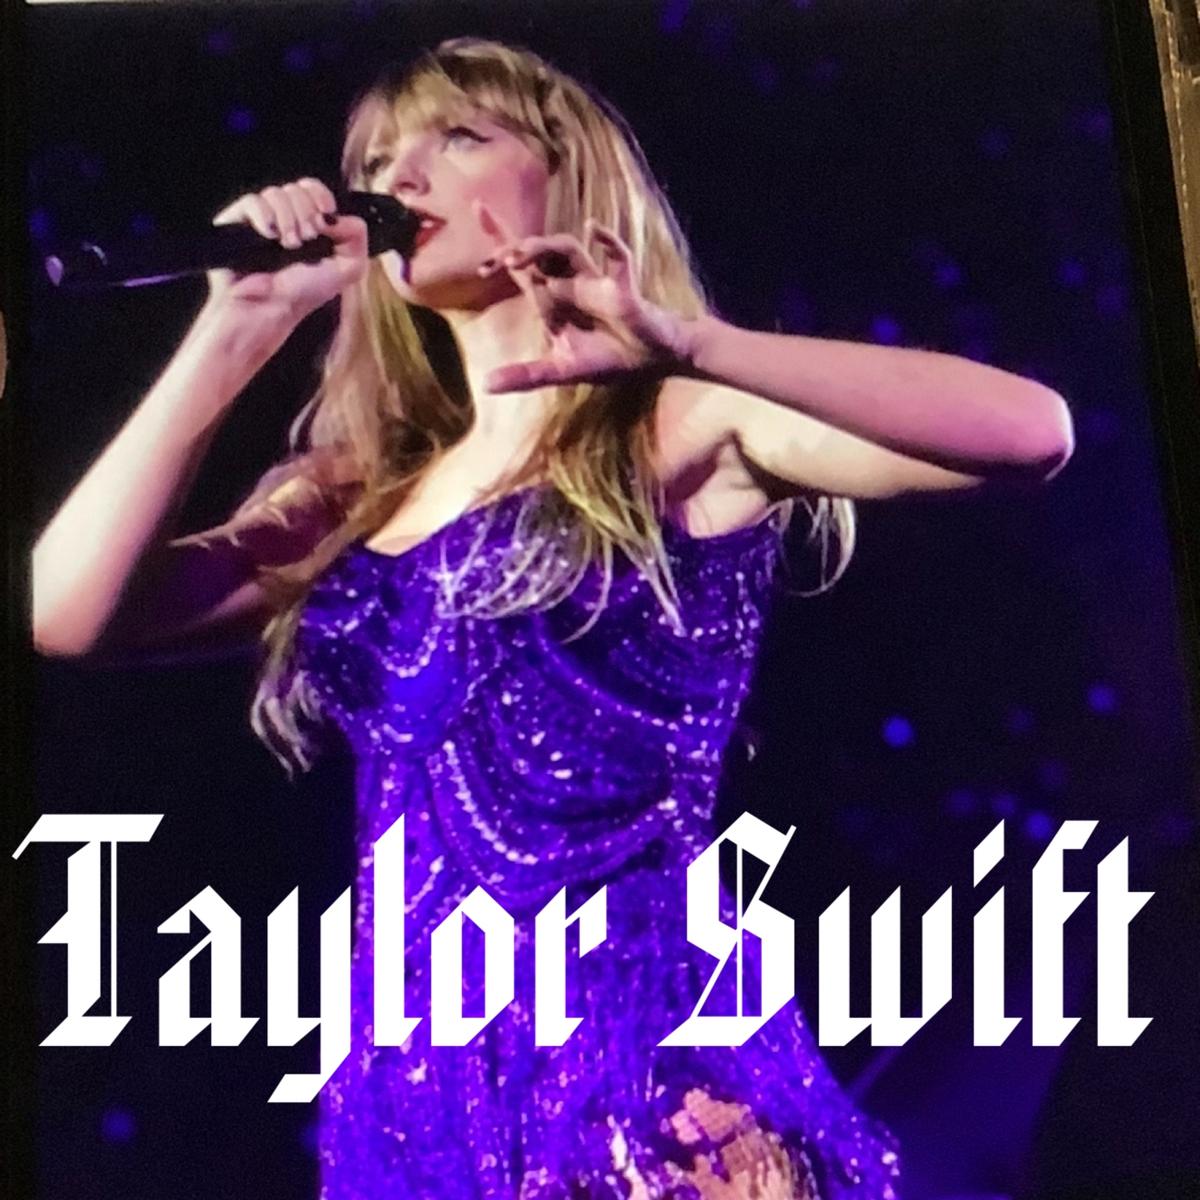 SWIFTY_FOR_♾️♾️'s images